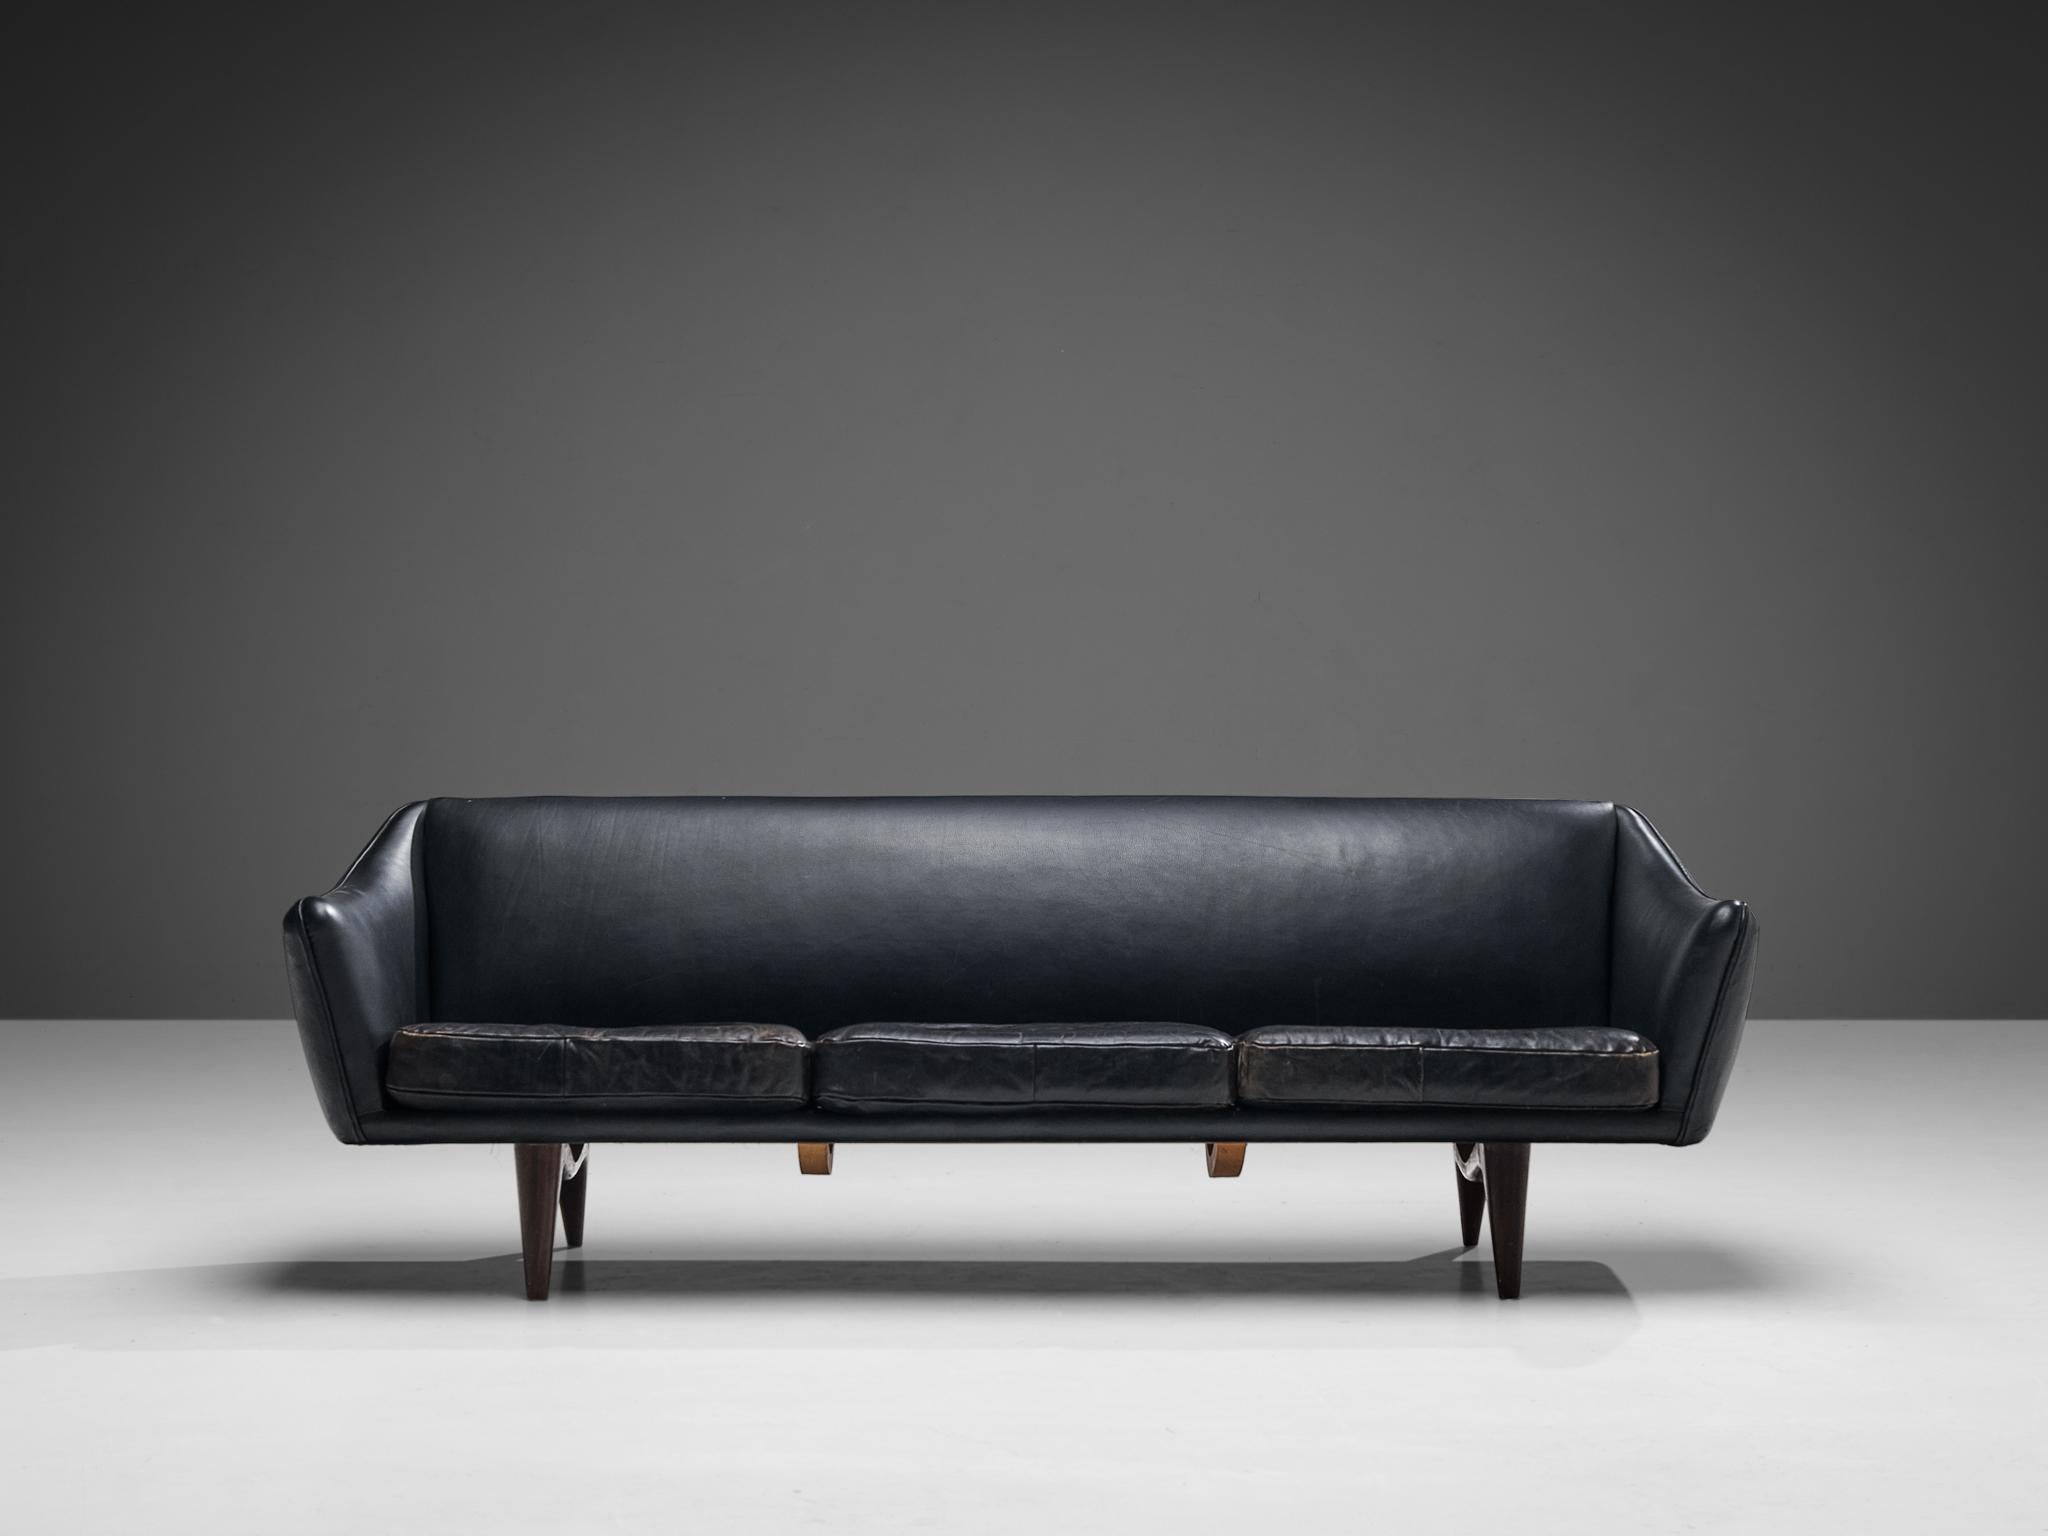 Illum Wikkelsø for A. Mikael Laursen & Søn, sofa, model 'ML-140', leather, mahogany, Denmark, 1950s. 

This sophisticated sofa shows an unusual elegance and great eye for detail, combined with outstanding craftsmanship, which is characteristic for